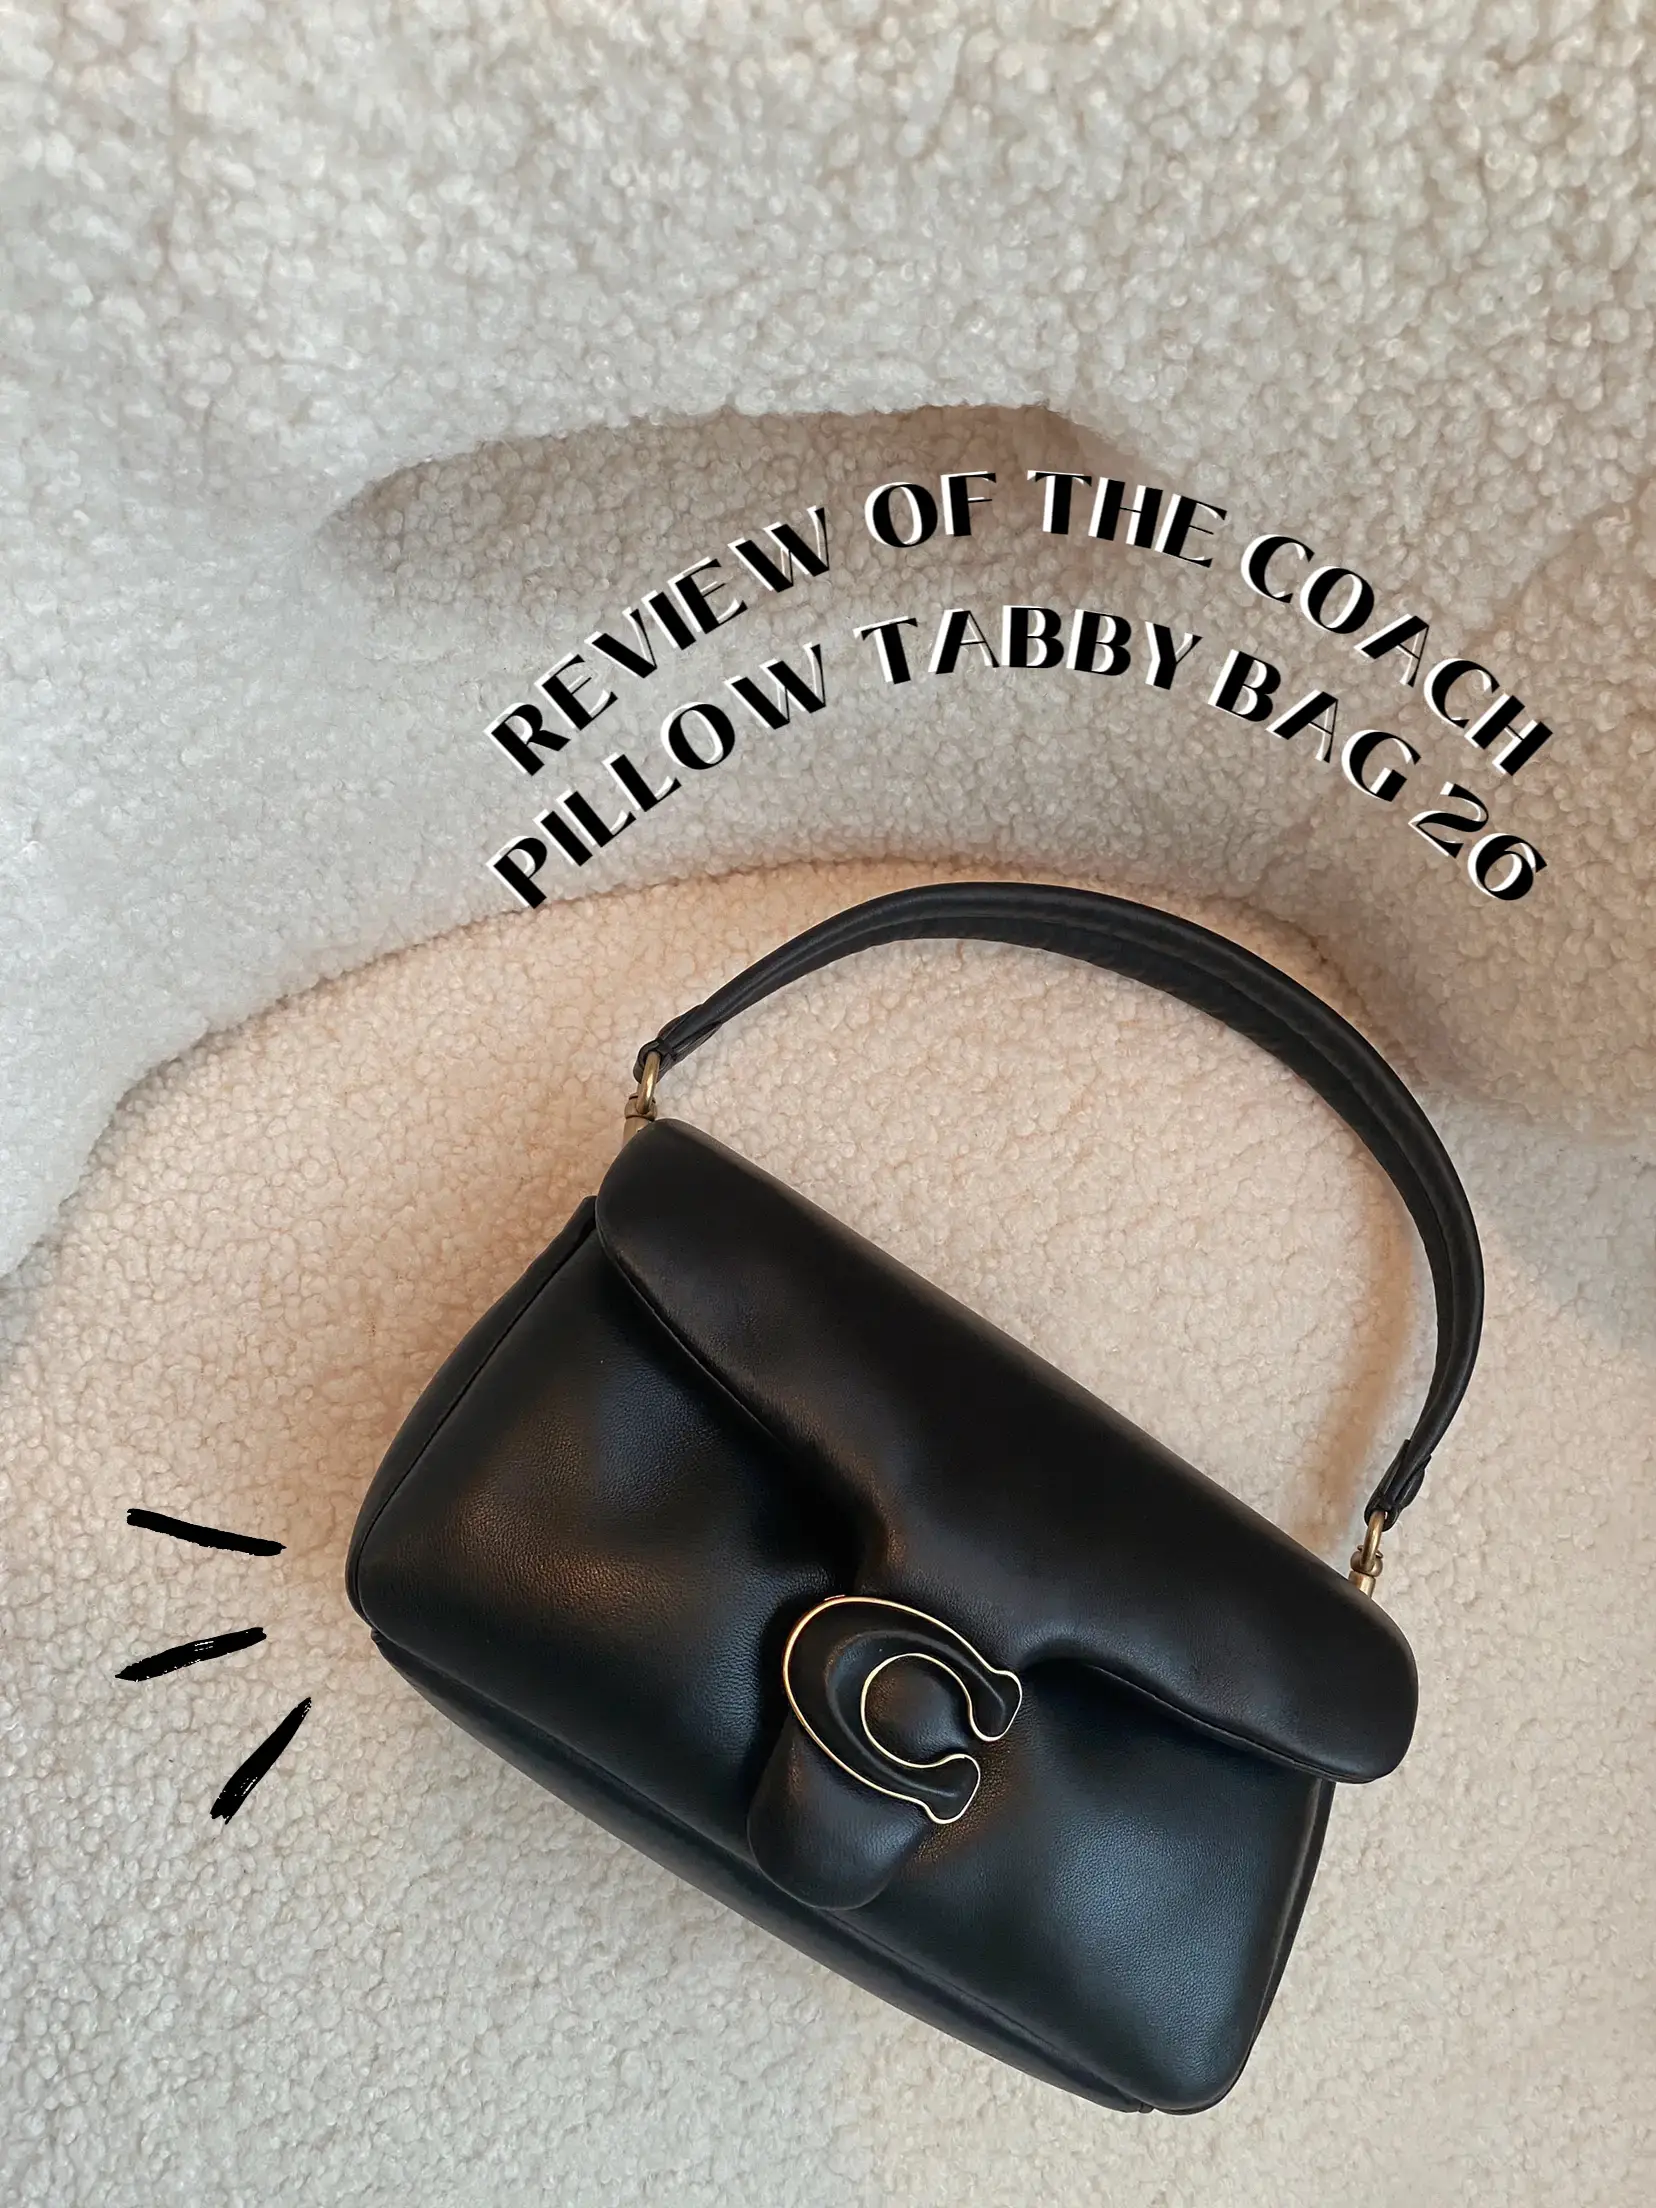 Coach's Pillow Tabby Bag Is Back, Right in Time for Fall